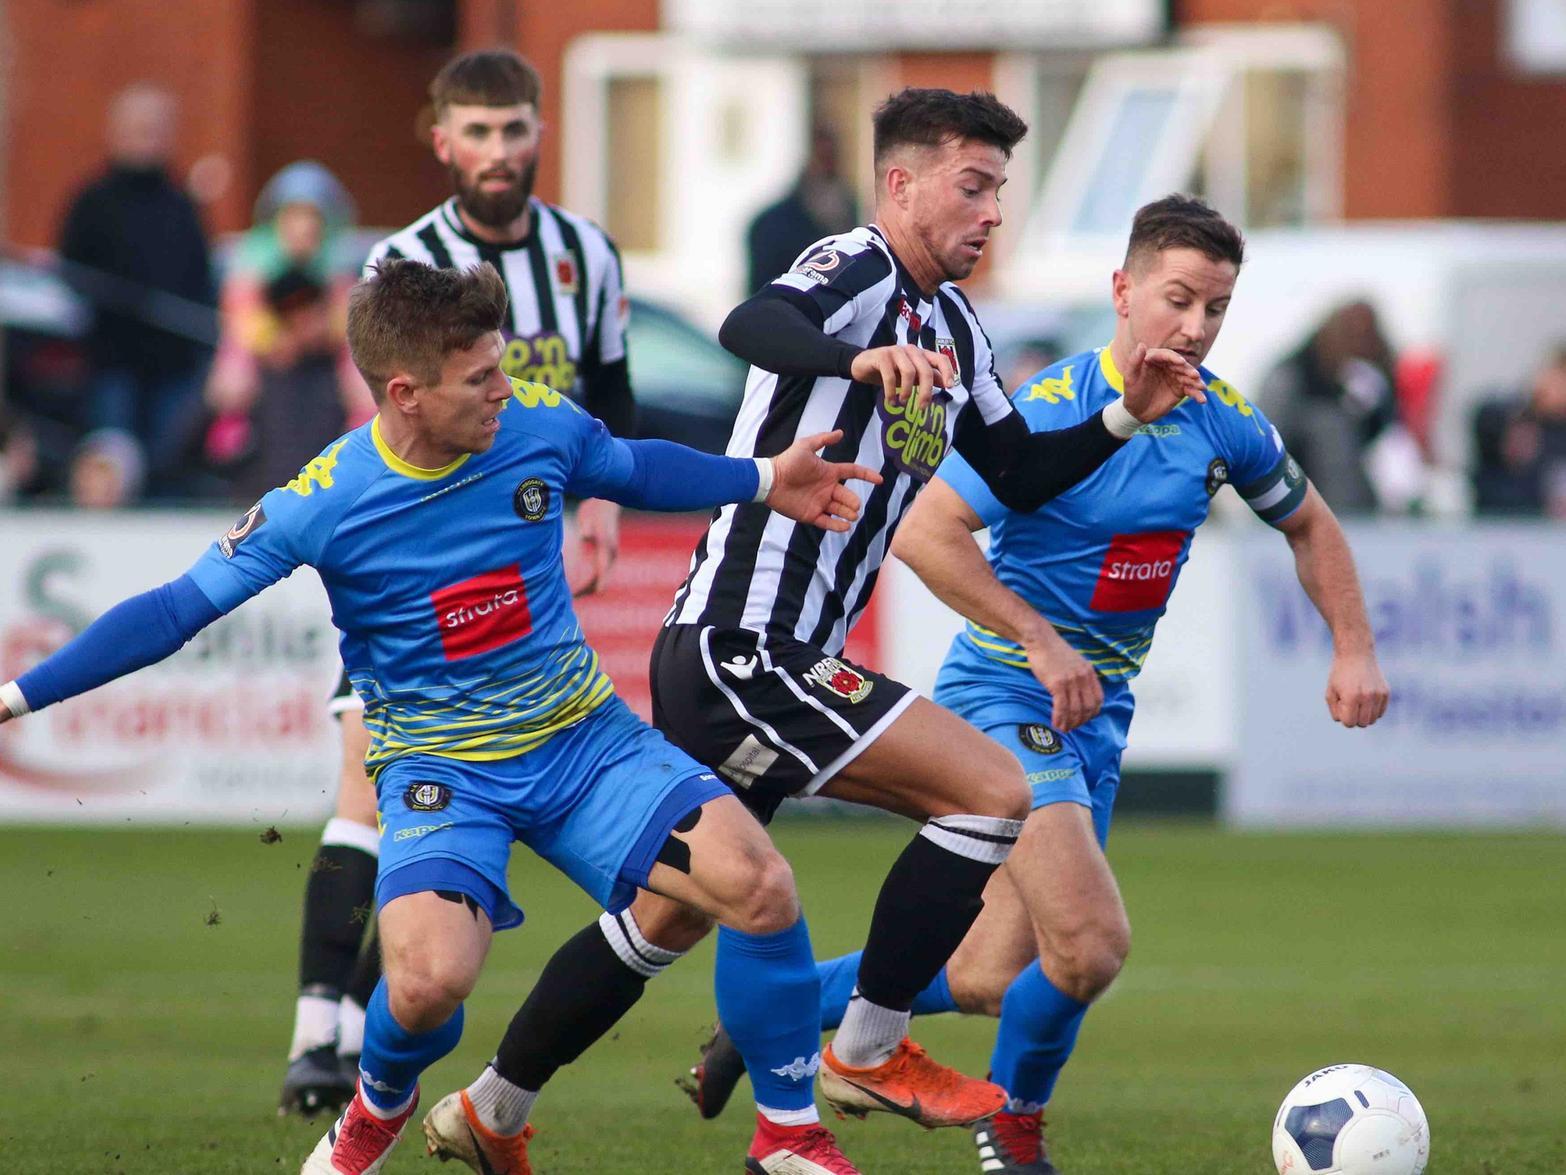 Lloyd Kerry,left, and Josh Falkingham battle for possession during Harrogate Town's triumph over Chorley at Victory Park.